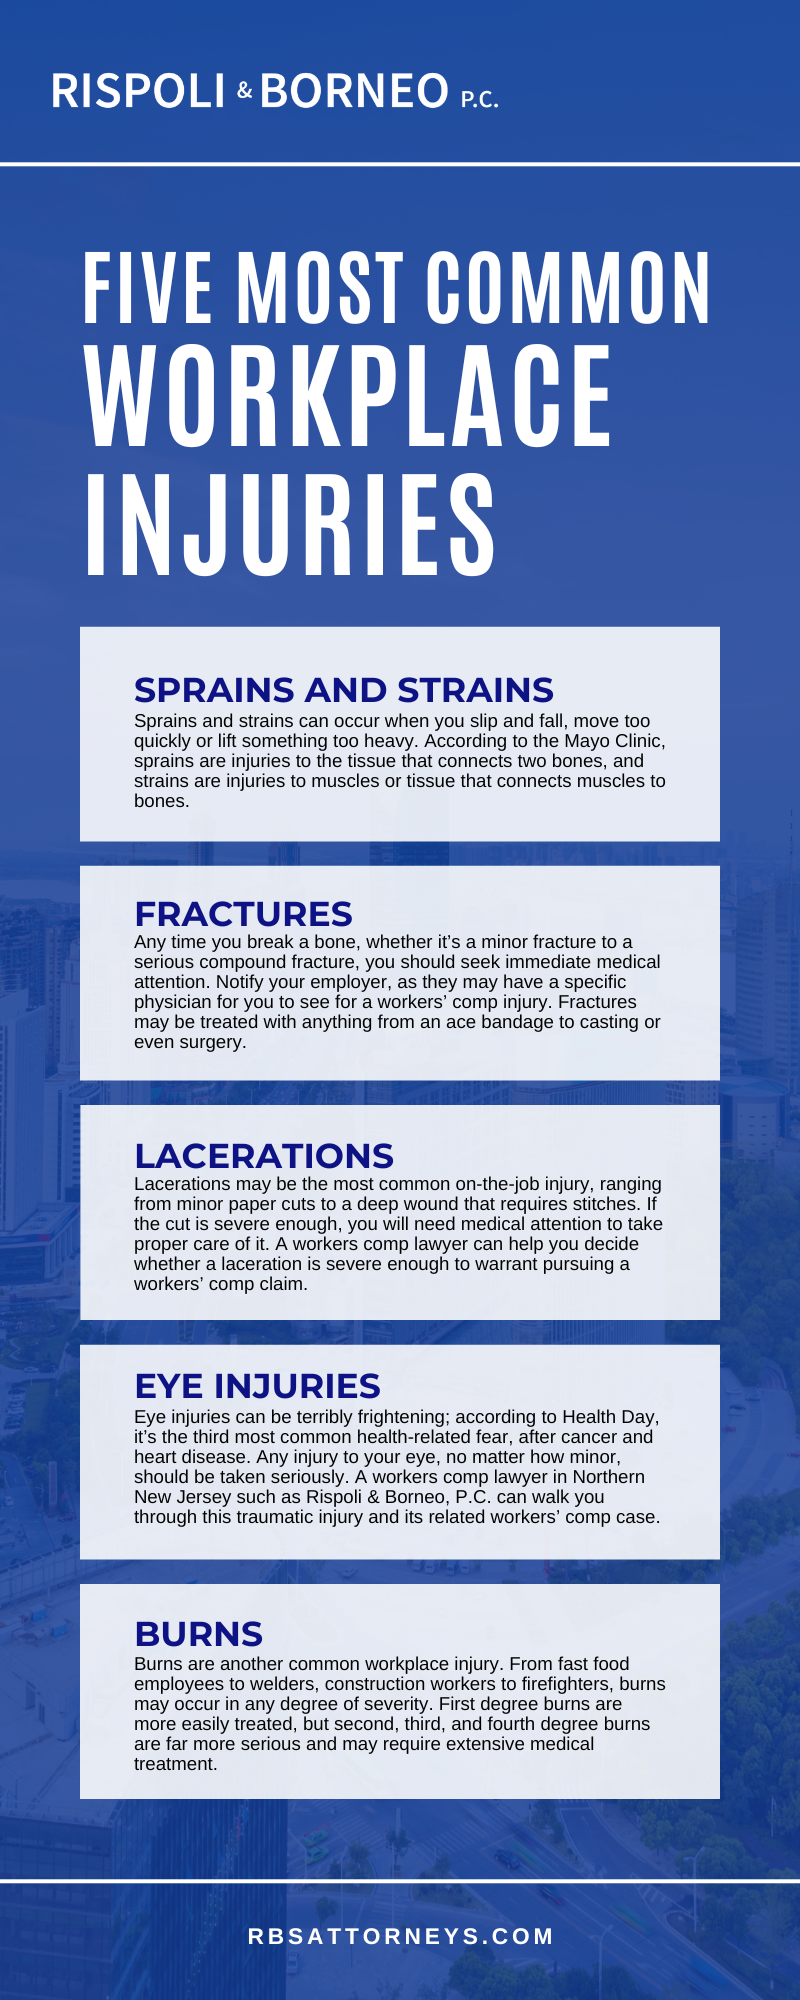 Five Most Common Workplace Injuries Infographic